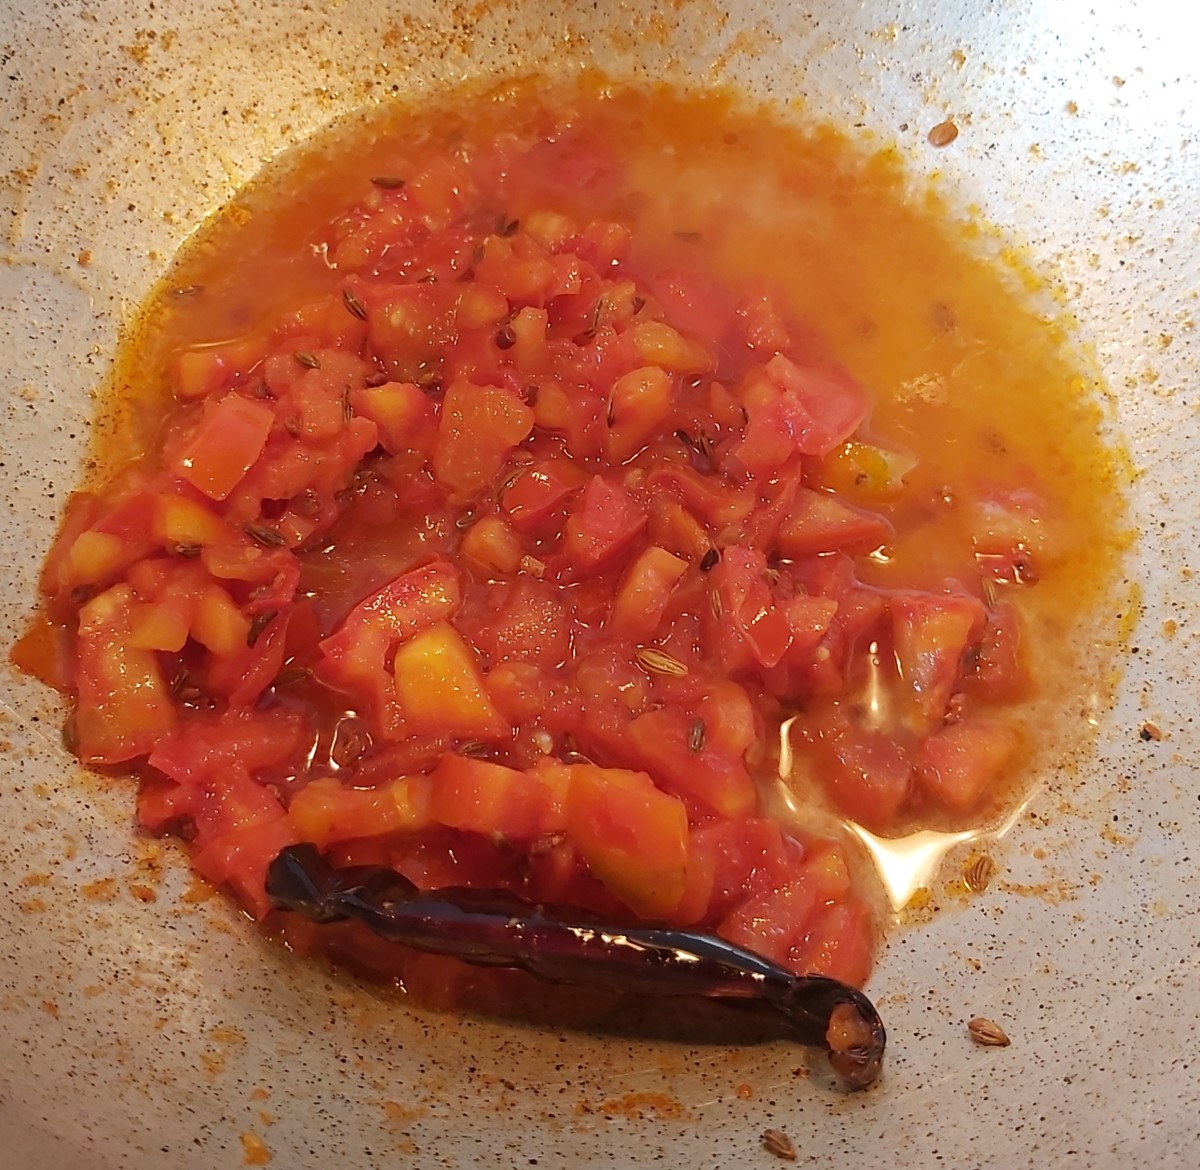 Add about 1/2 cup of water and continue to cook over low heat till the tomatoes cook properly. Stir in between to prevent sticking to the bottom.